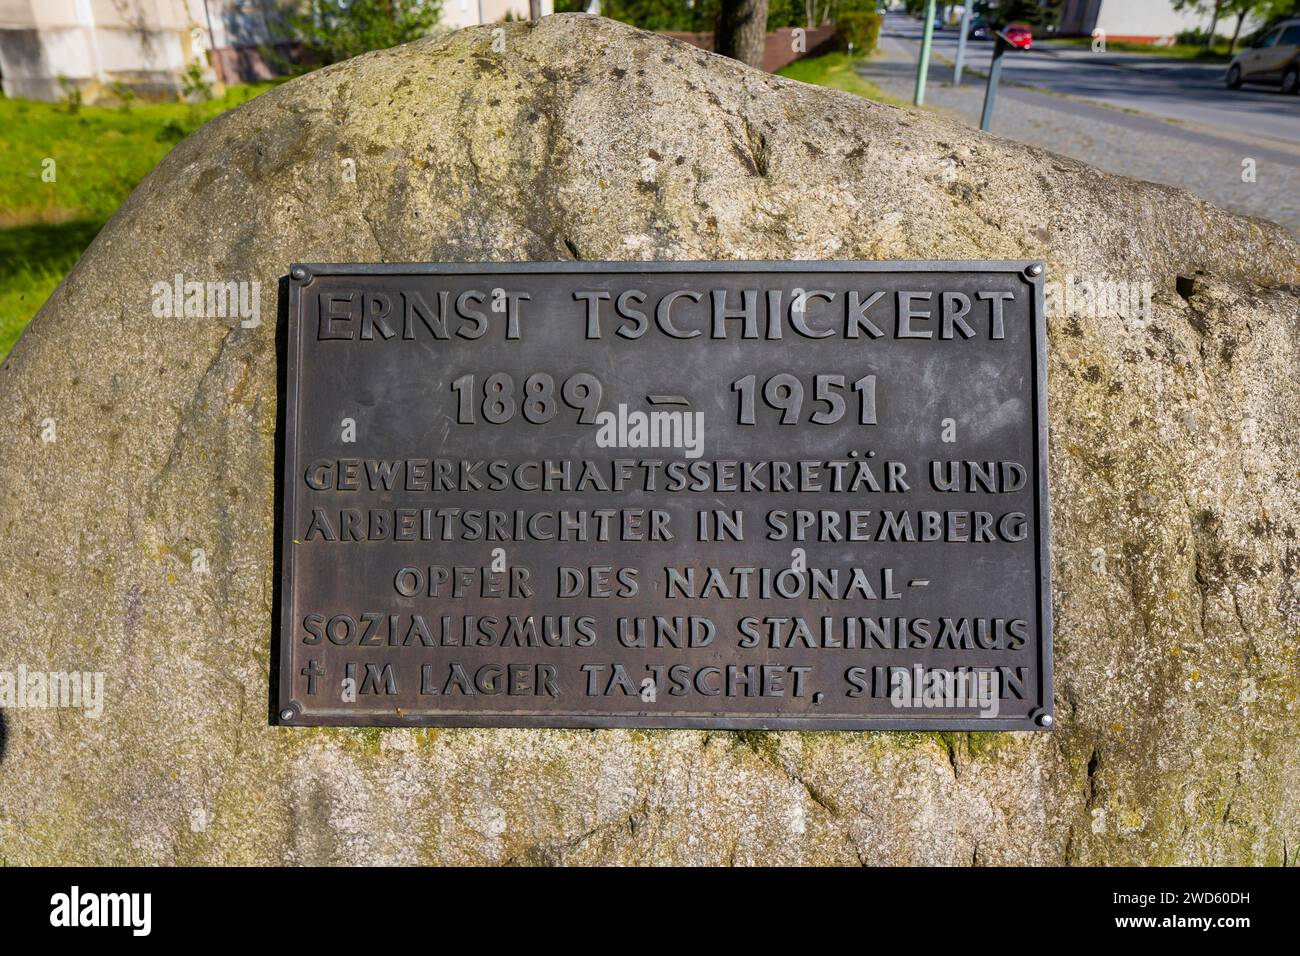 The plaque commemorates the Spremberg trade union secretary and labour judge Ernst Tschickert, who became a victim of National Socialism and Stock Photo